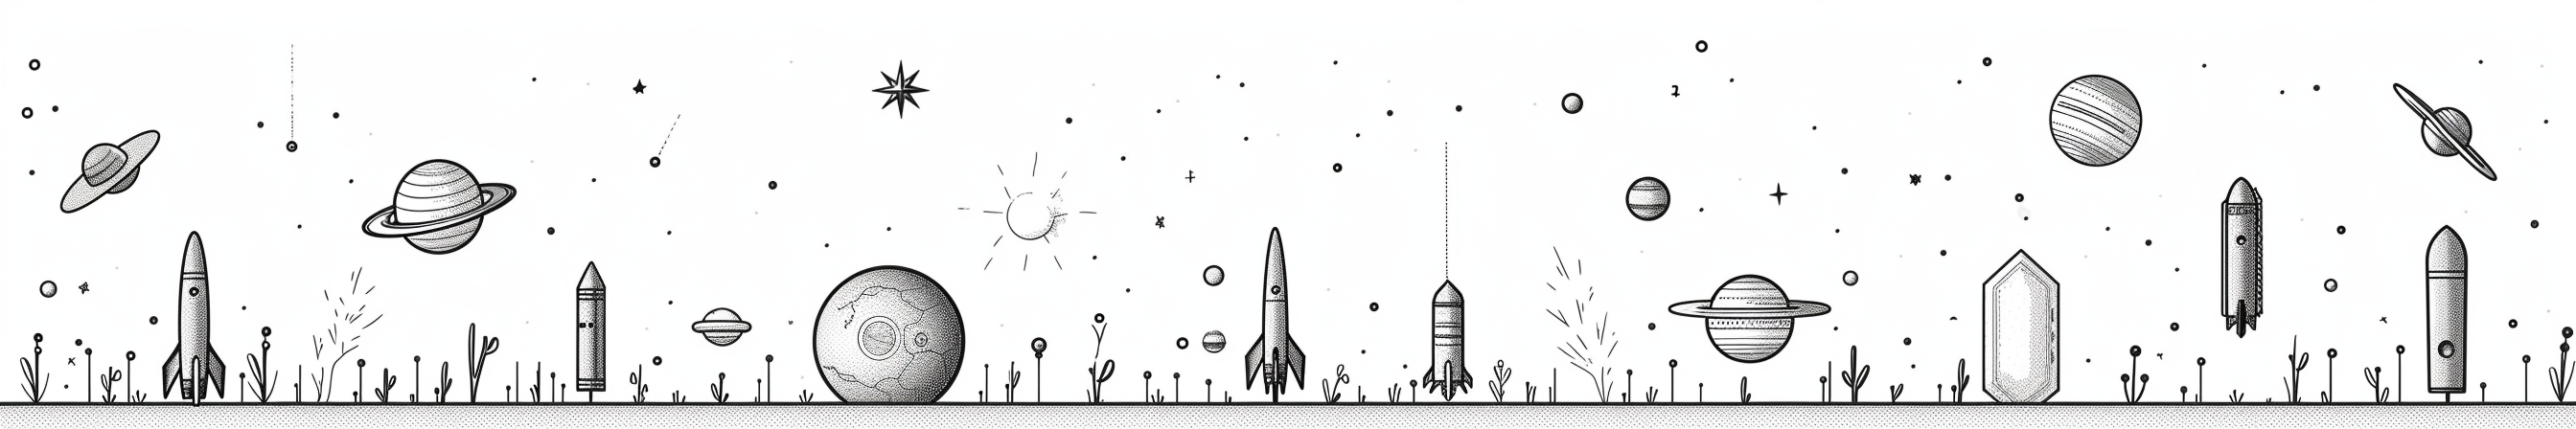 Line art illustration of rocketships and planet, generated by MidJourney